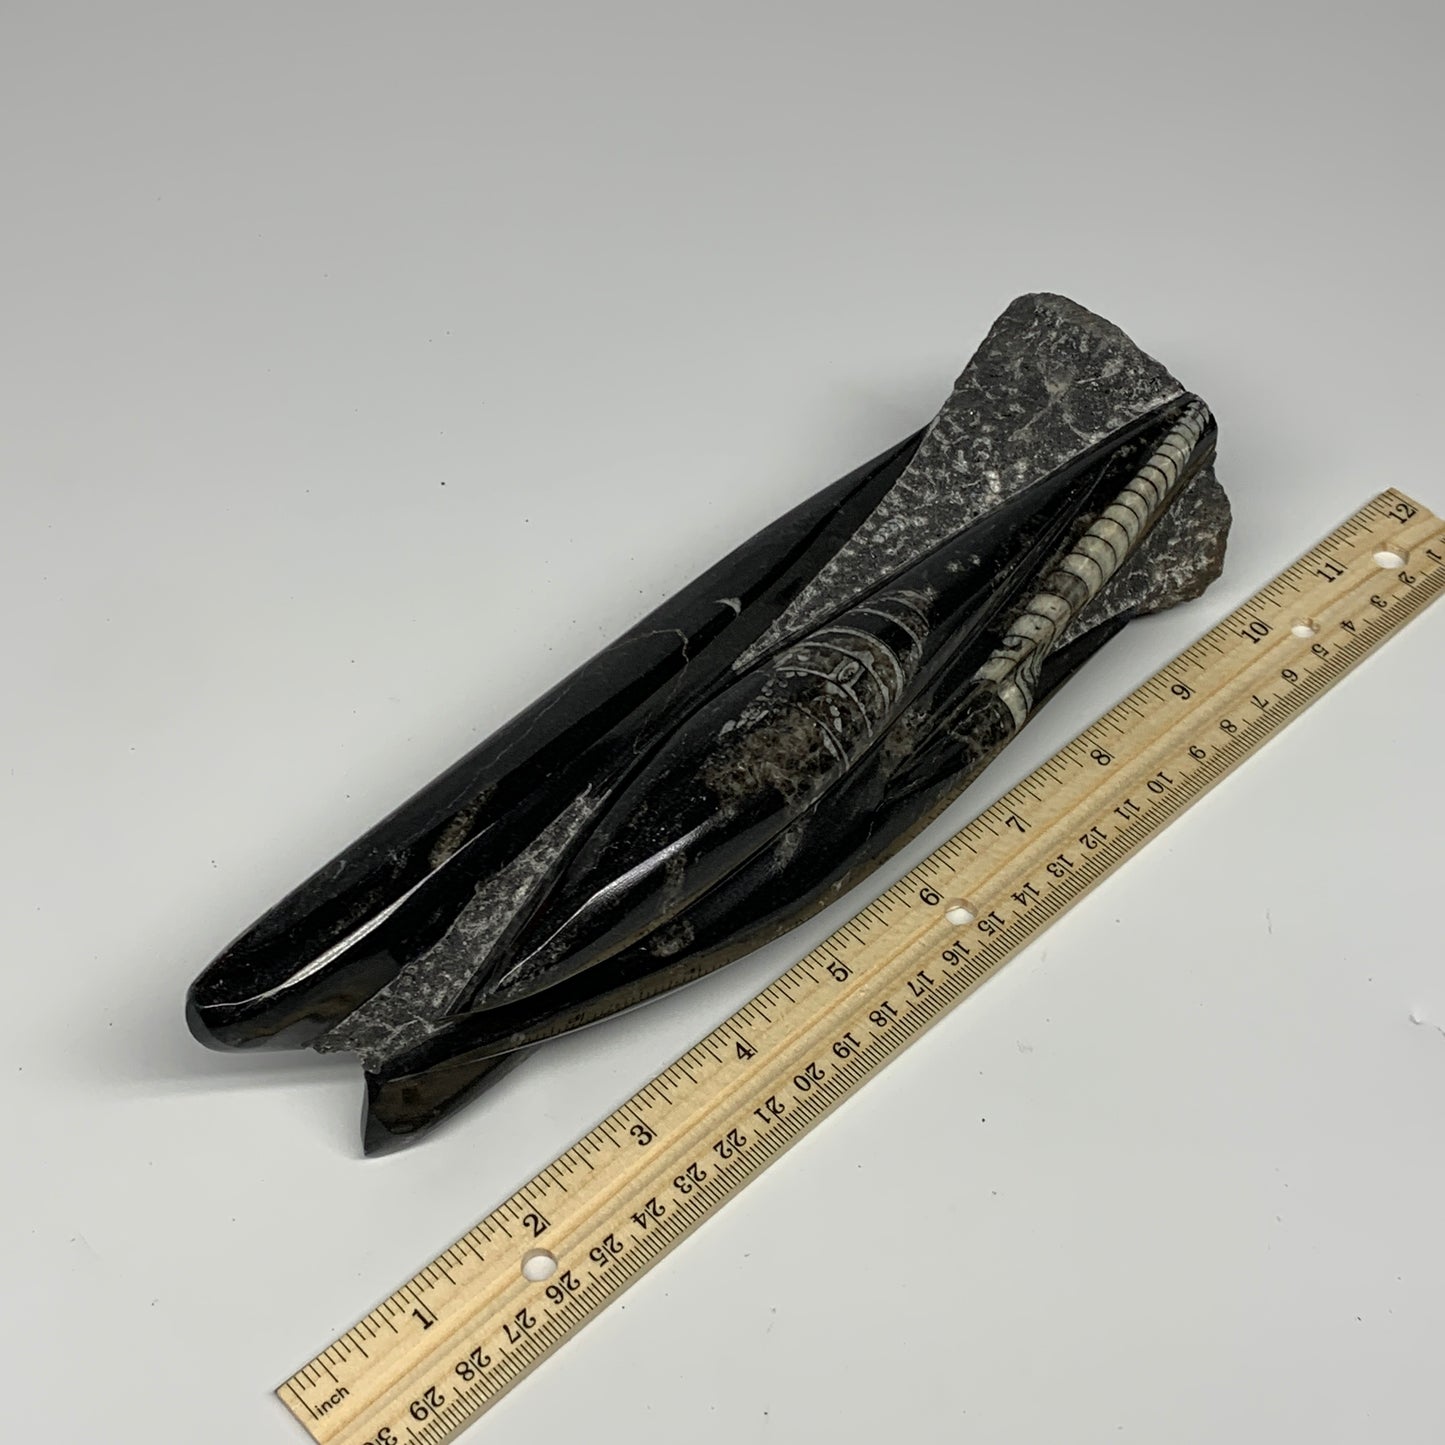 1130g, 9.1"x2.3"x2" Black Fossils Orthoceras Sculpture Tower @Morocco, B23413